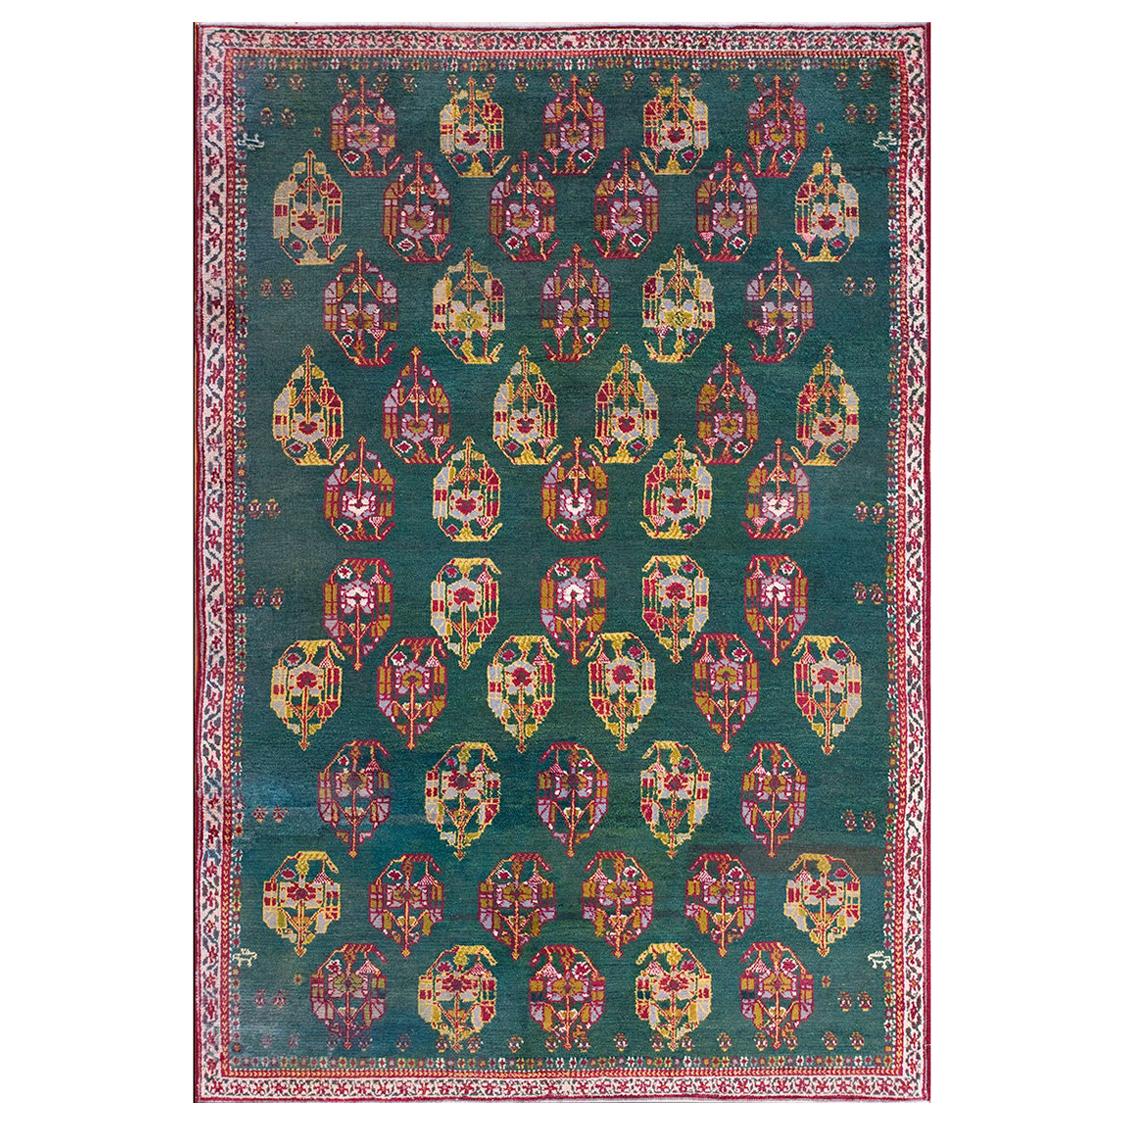 Early 20th Century N. Indian Agra Carpet ( 5'10" x 8'6" - 178 x 260 )